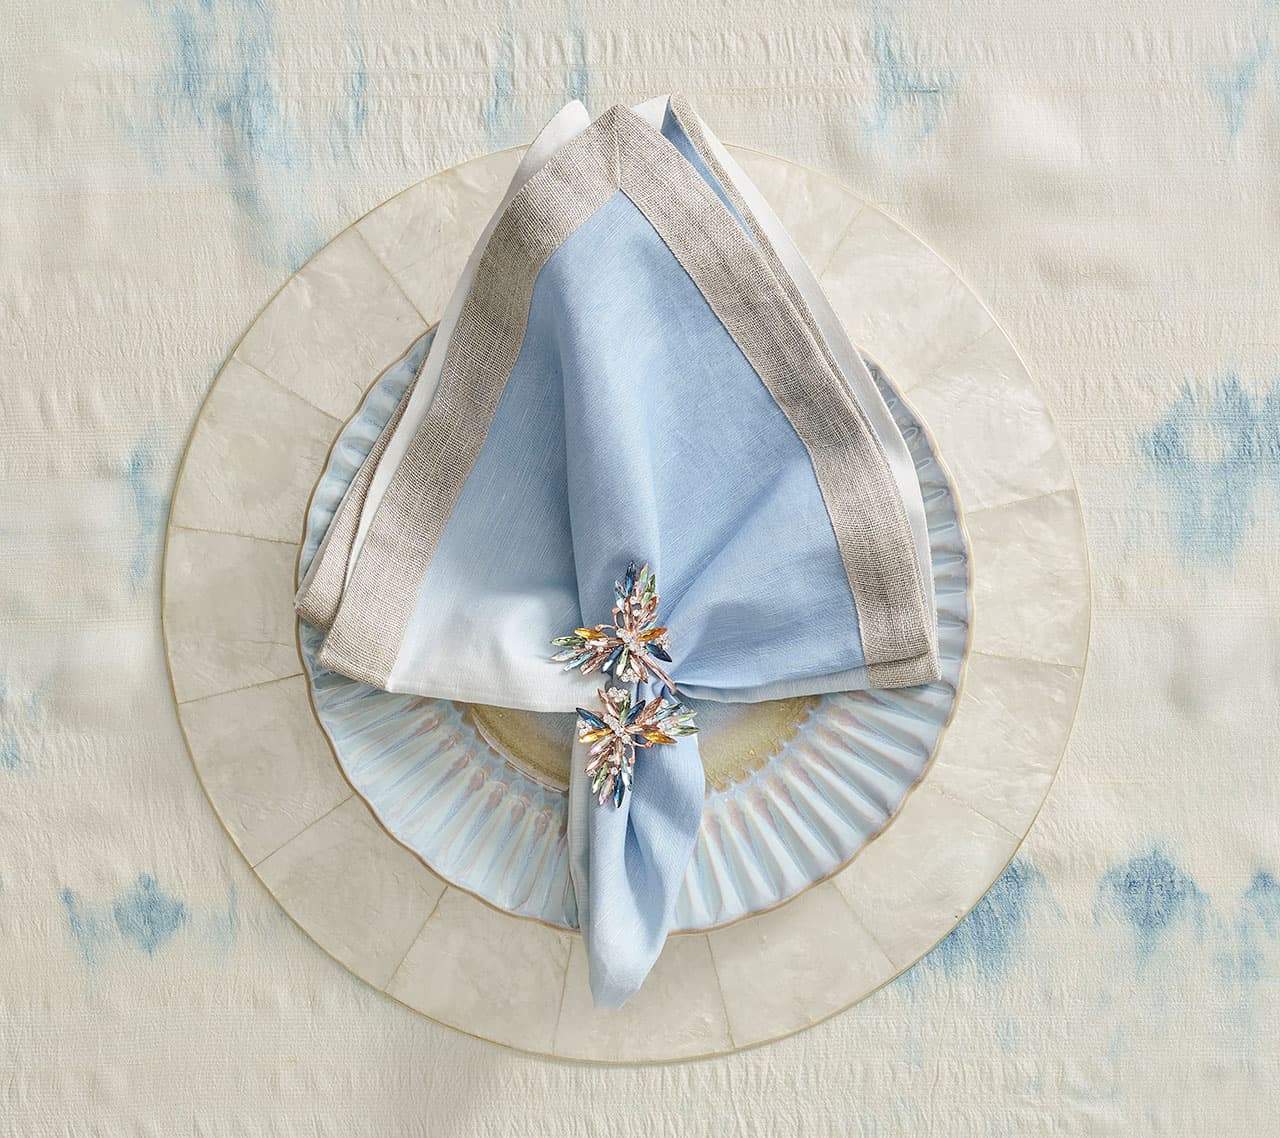 Jeweled napkin ring holding a blue and white linen napkin on top of the round Capiz Placemat in Natural